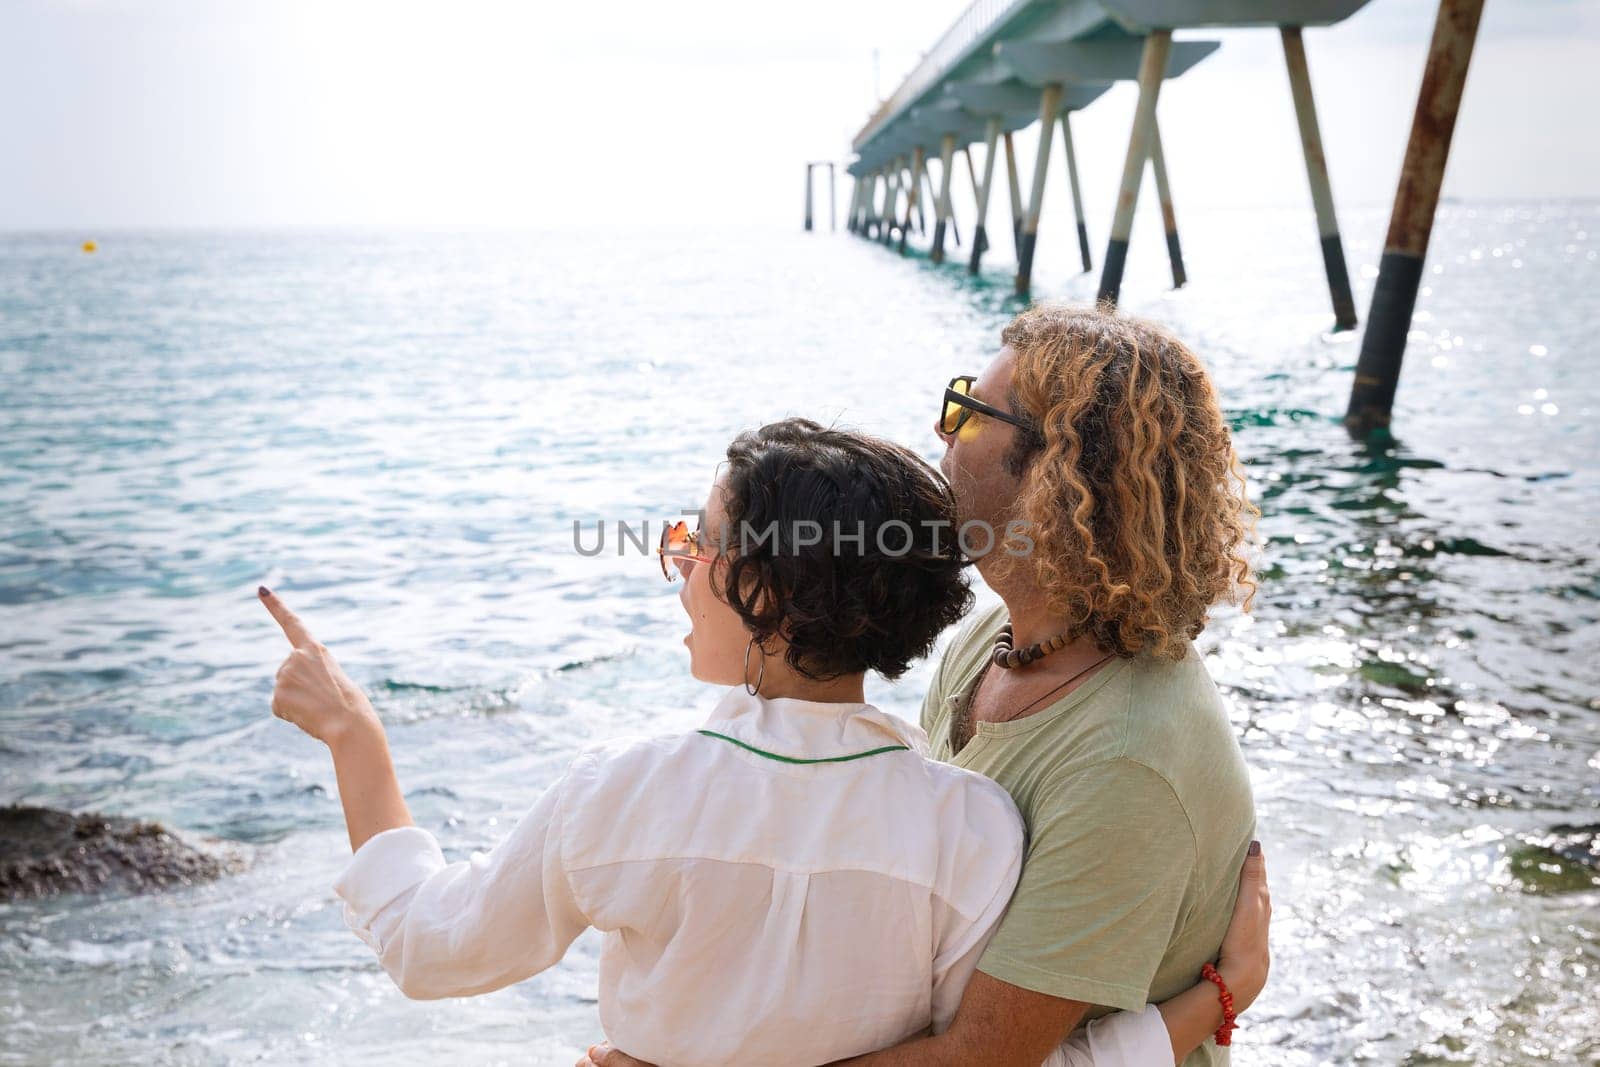 Smiling couple in sunglasses enjoying vacation hugging each other pointing and looking at the sea.